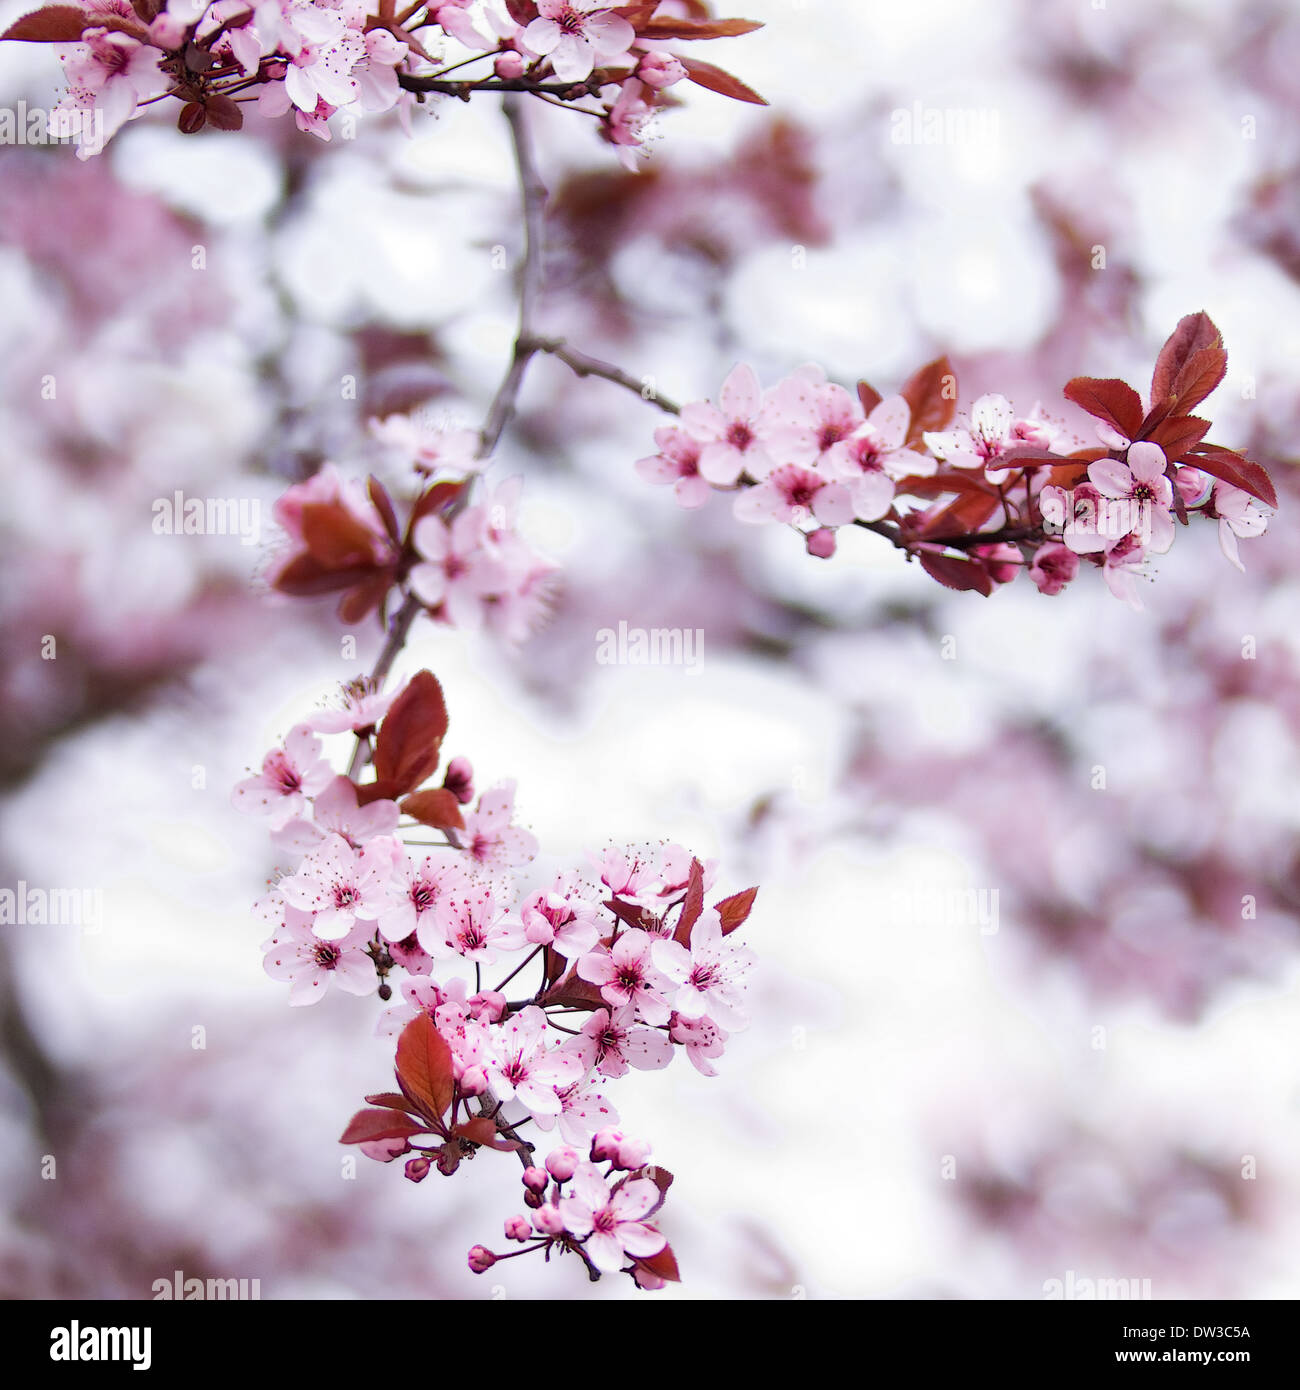 Blooming pink cherry blossom branches on tree in spring with faded background - square cropped image Stock Photo